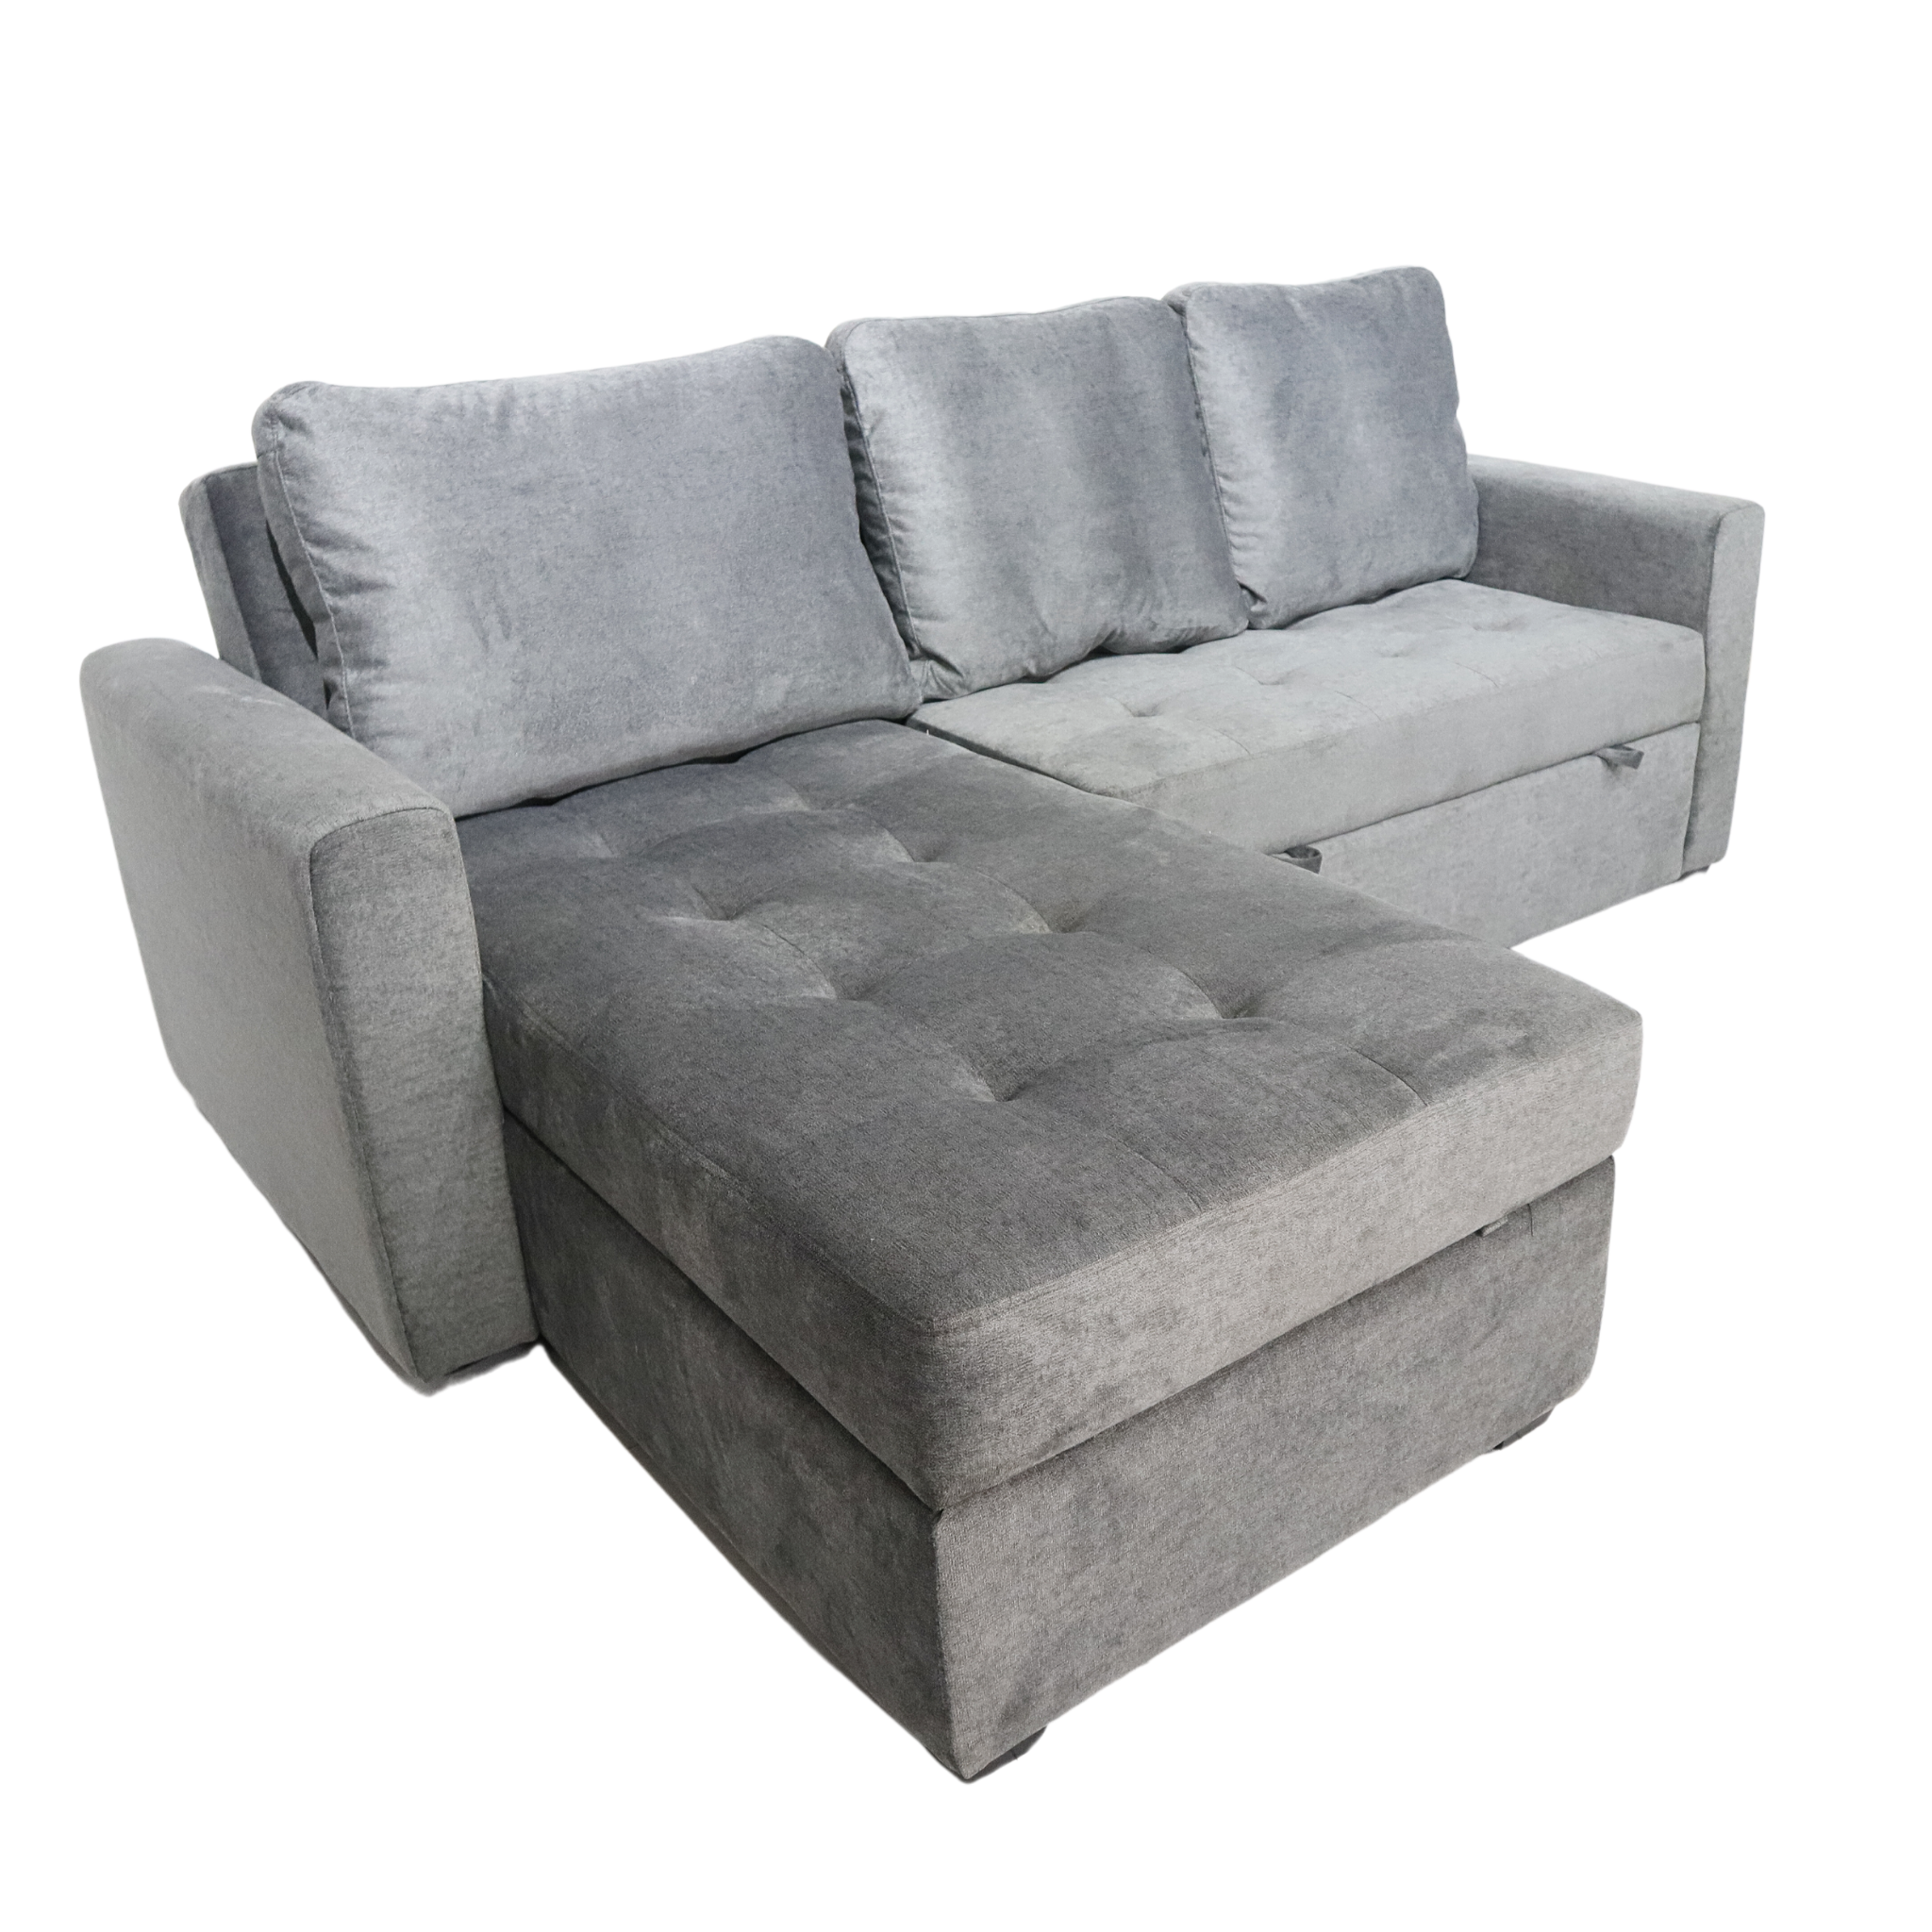 DARCY Sofabed with Storage Chaise Affordahome Furniture